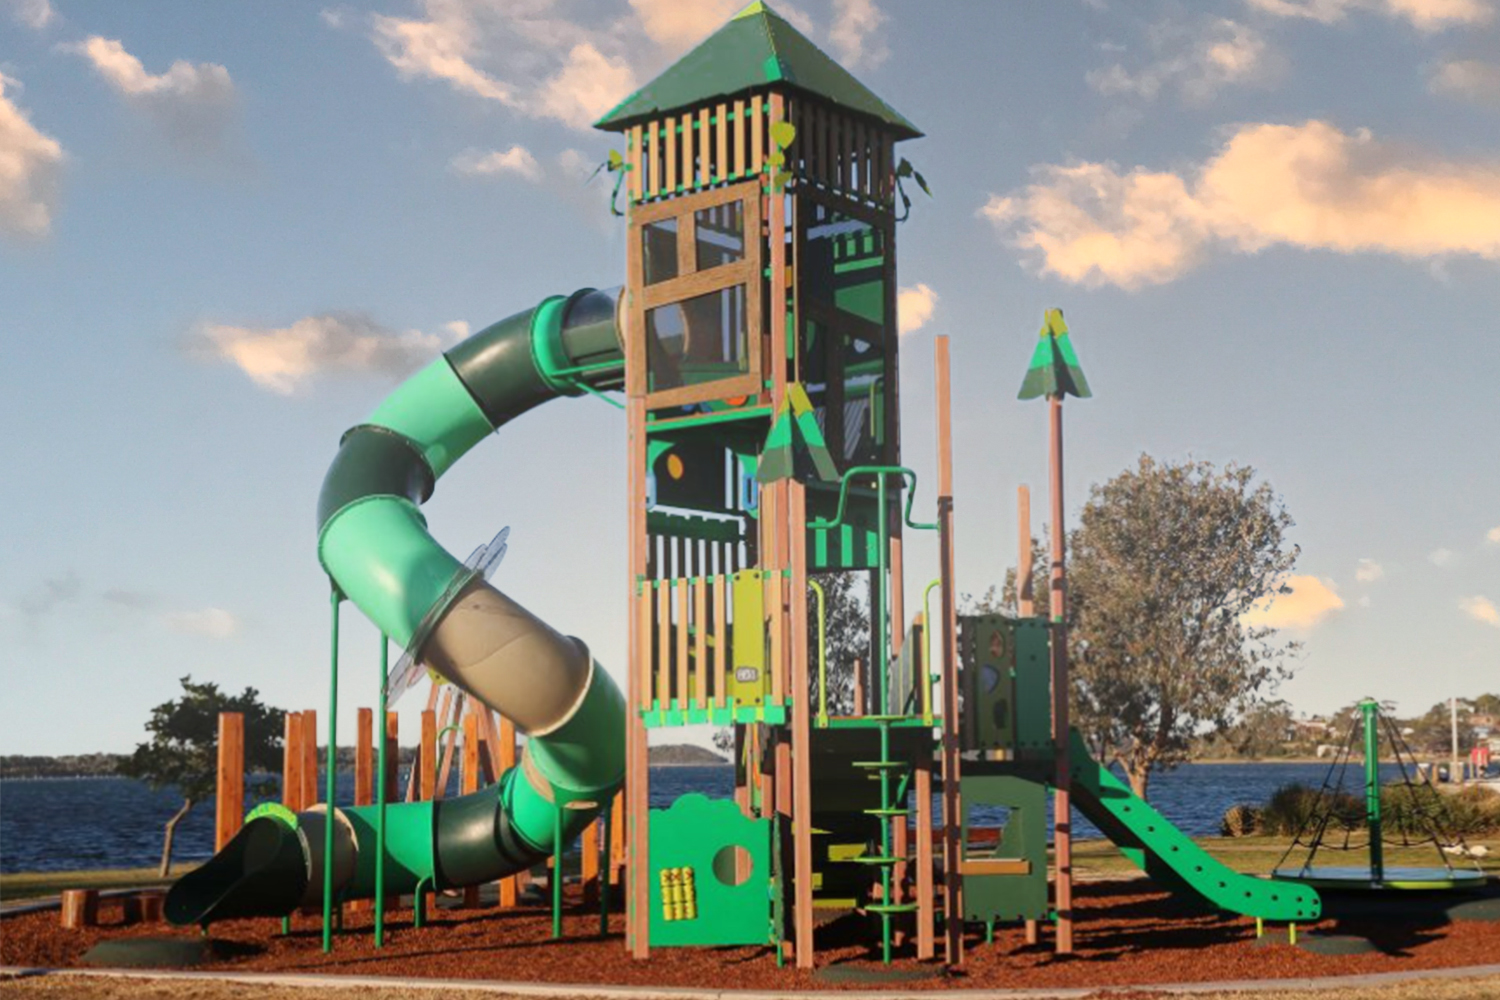 The children's playground at the reserve.